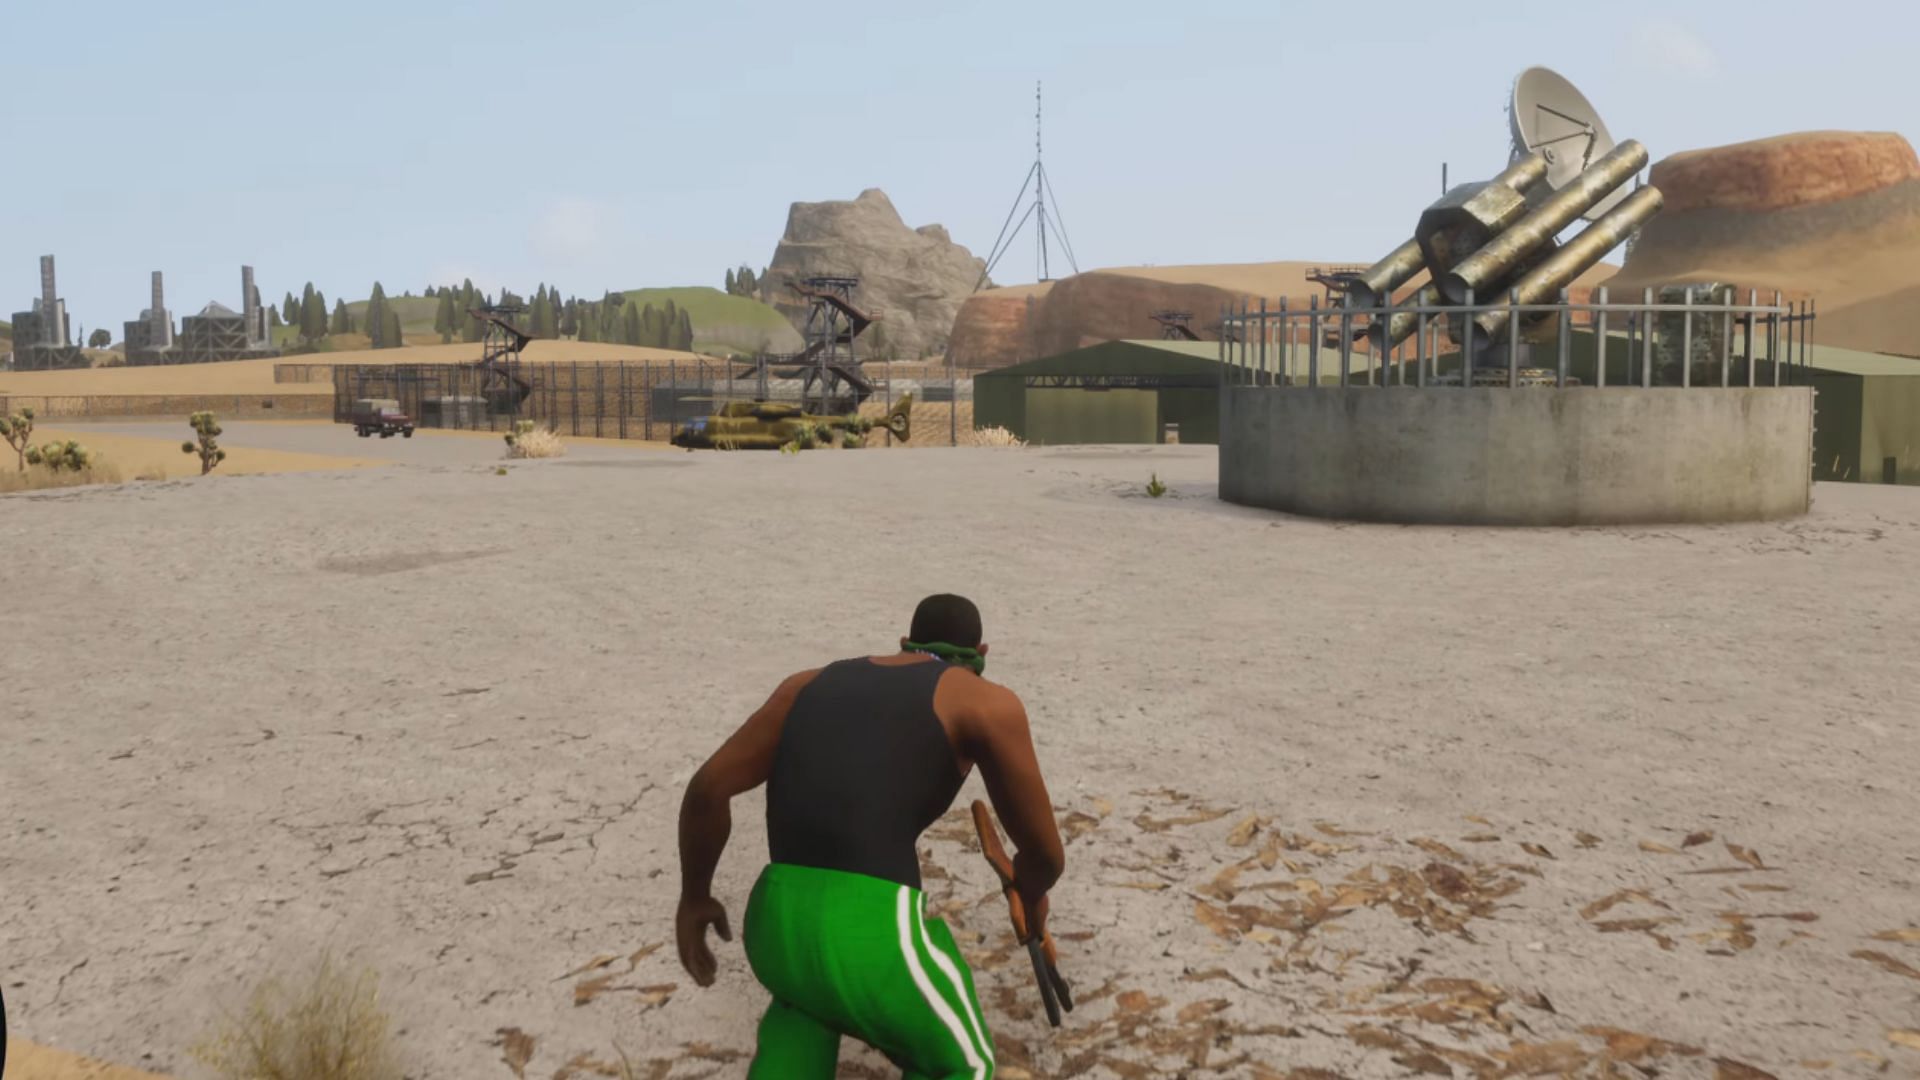 Area 69, as it appears in GTA San Andreas - The Definitive Edition (Image via Rockstar Games)